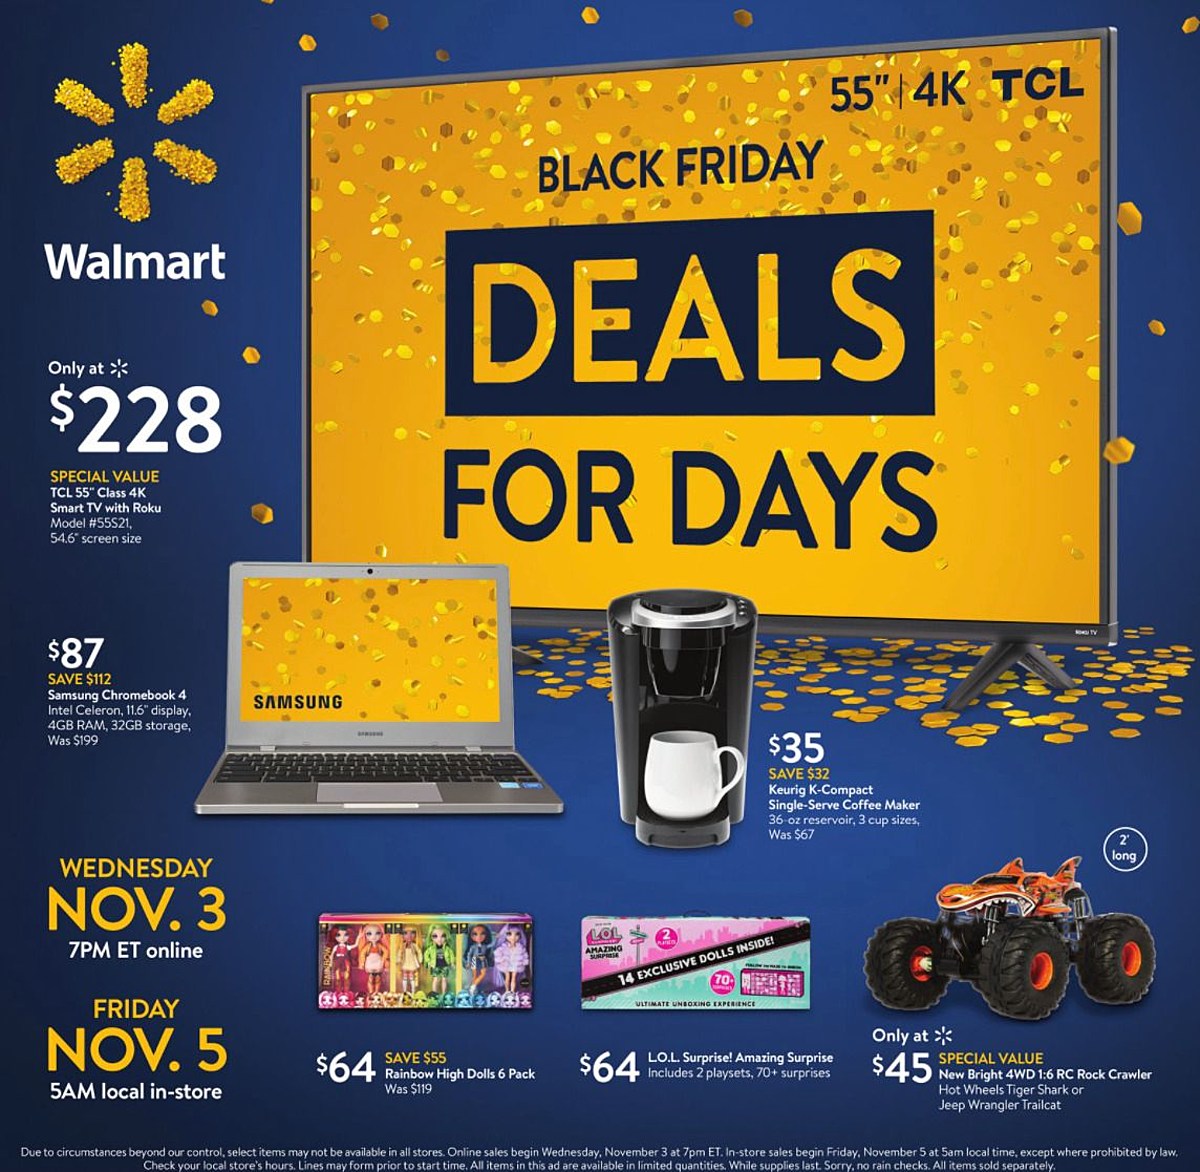 Walmart's 2021 Black Friday Deals Have Been Announced - When To Black Friday 2021 Deals Start